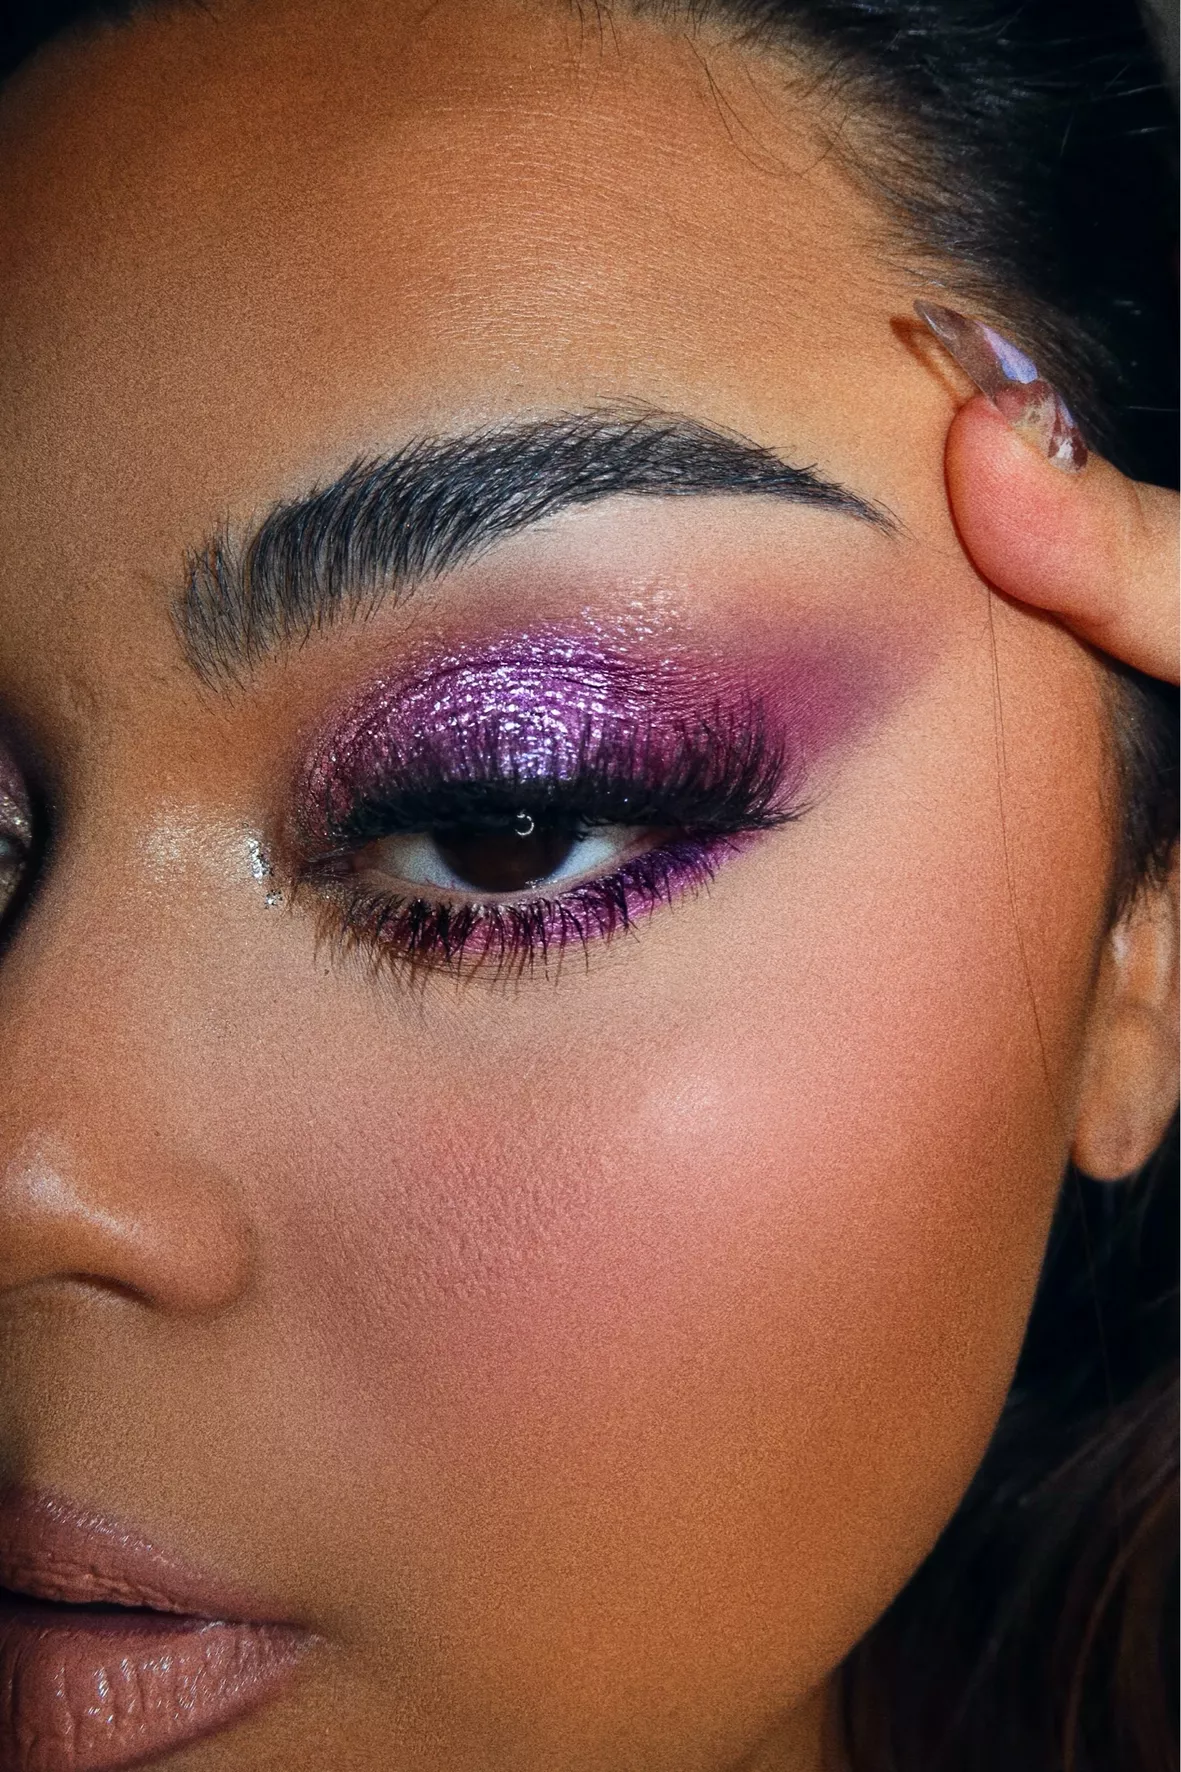 The Pink Glitter Eyeshadow Look You Need To Wear This Season